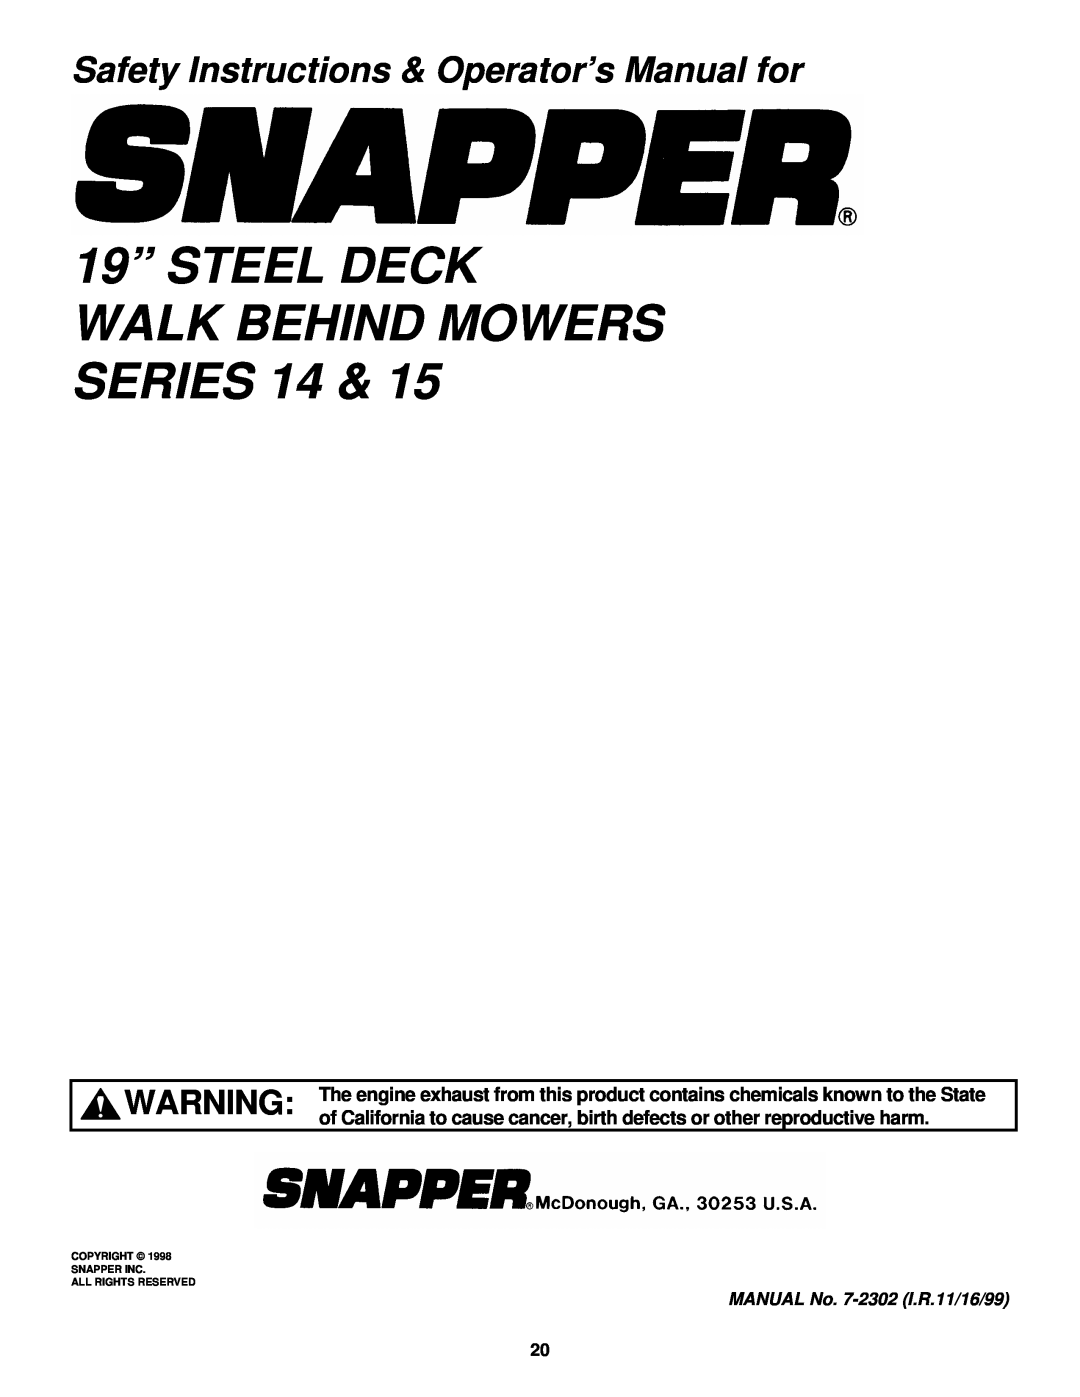 Snapper R194014 19” STEEL DECK WALK BEHIND MOWERS SERIES 14, Safety Instructions & Operator’s Manual for 